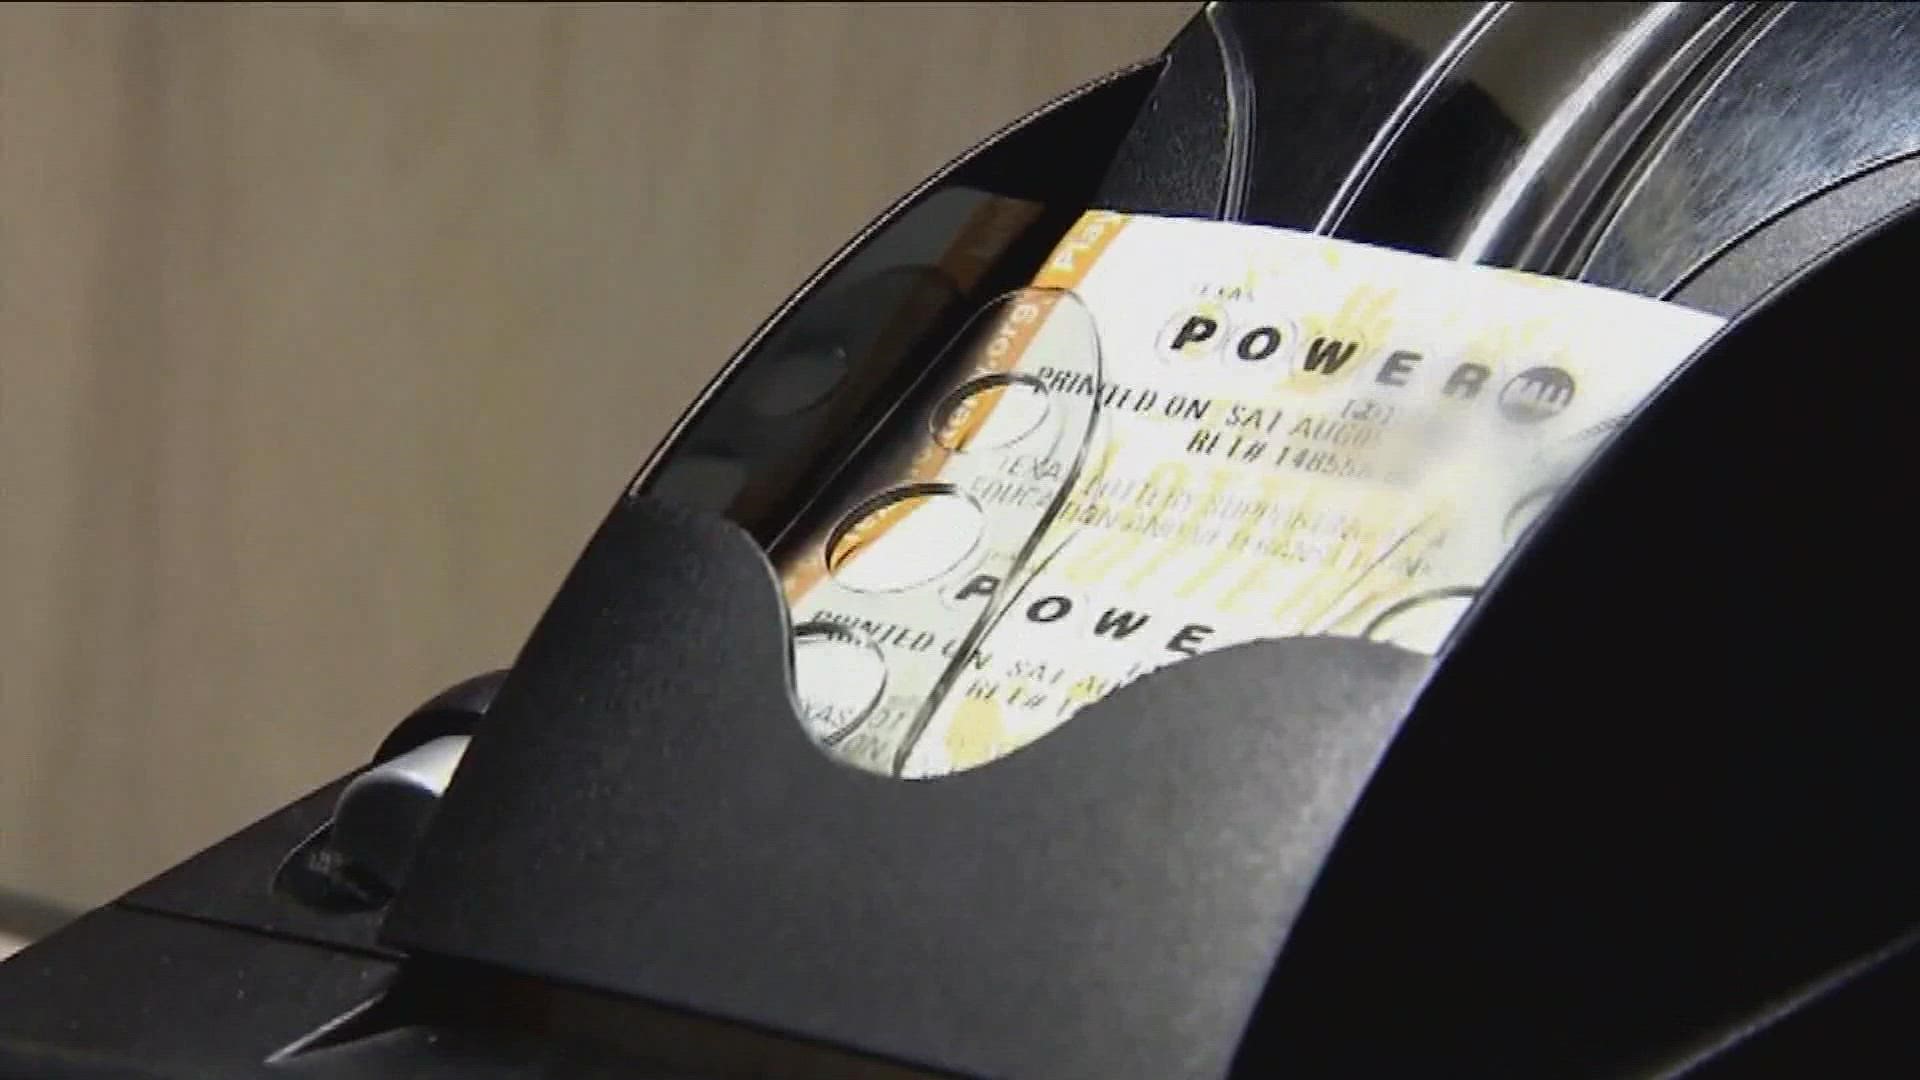 The Powerball jackpot has climbed to $1.5 billion with the next drawing set for Saturday.